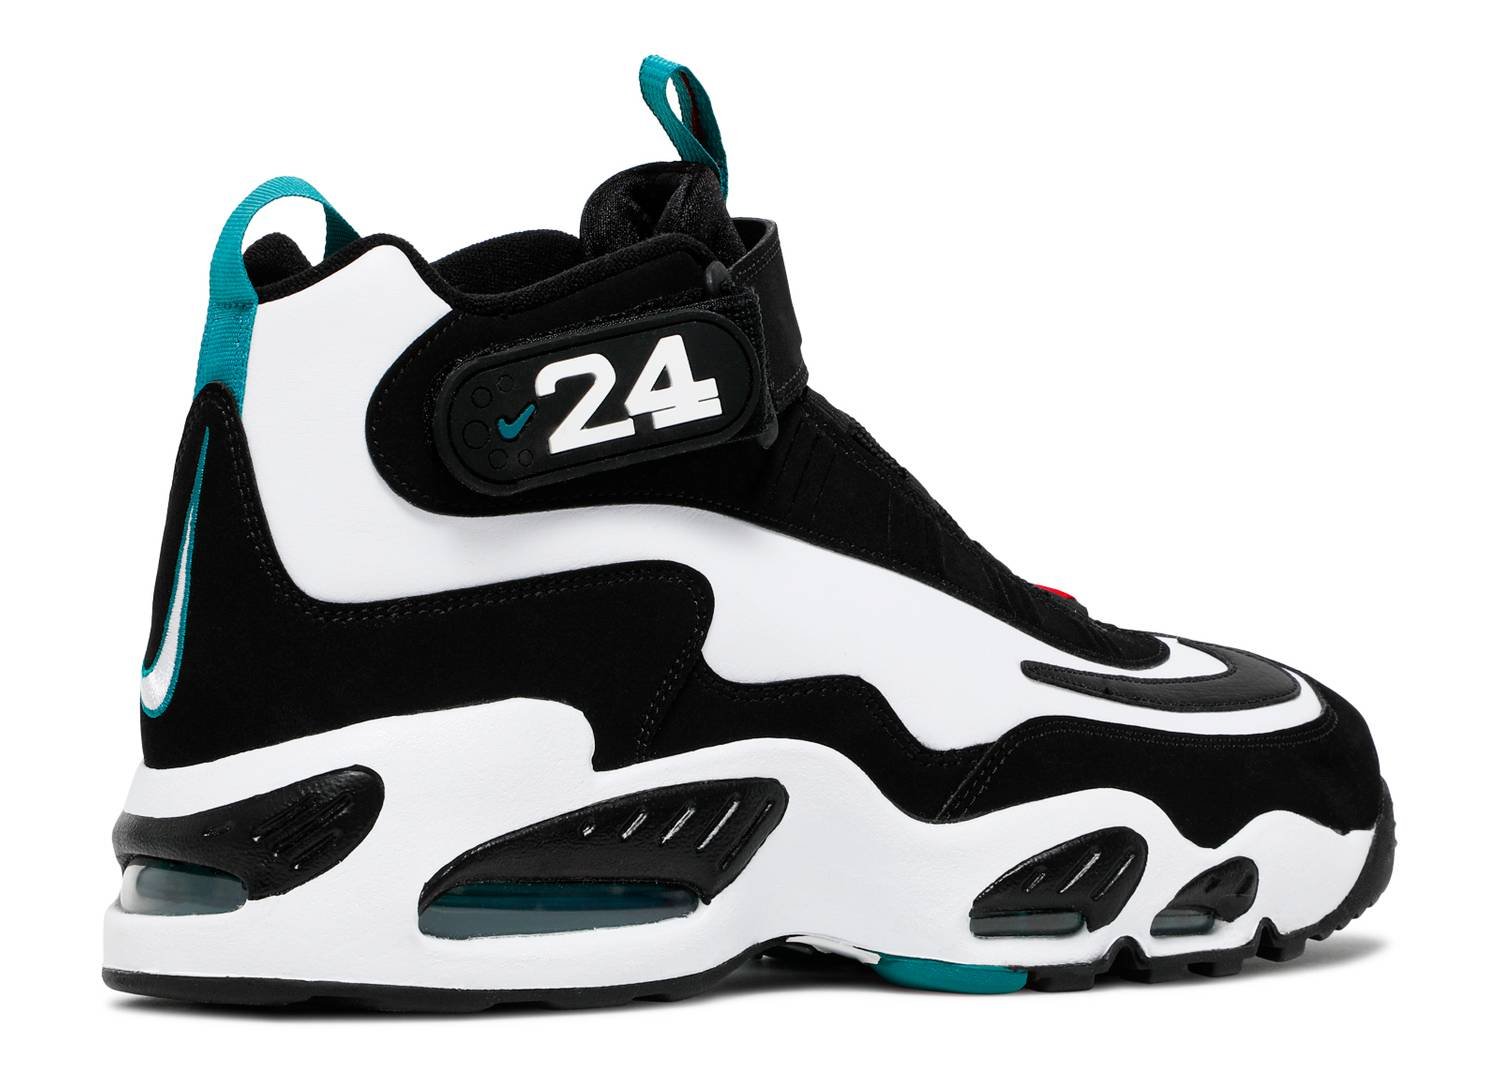 Image of Nike Air Griffey Max "Freshwater" Sz 9.5 